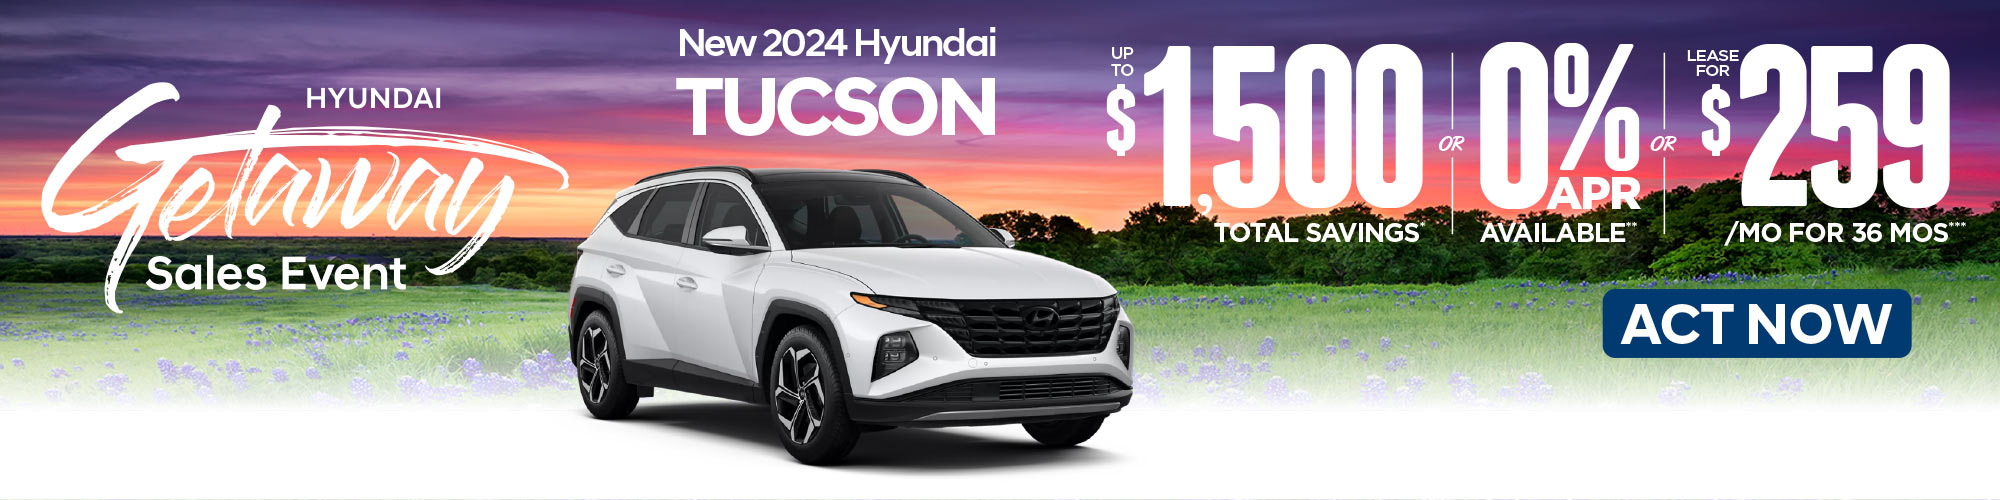 3.49% APR on select New Hyundai Models - ACT NOW